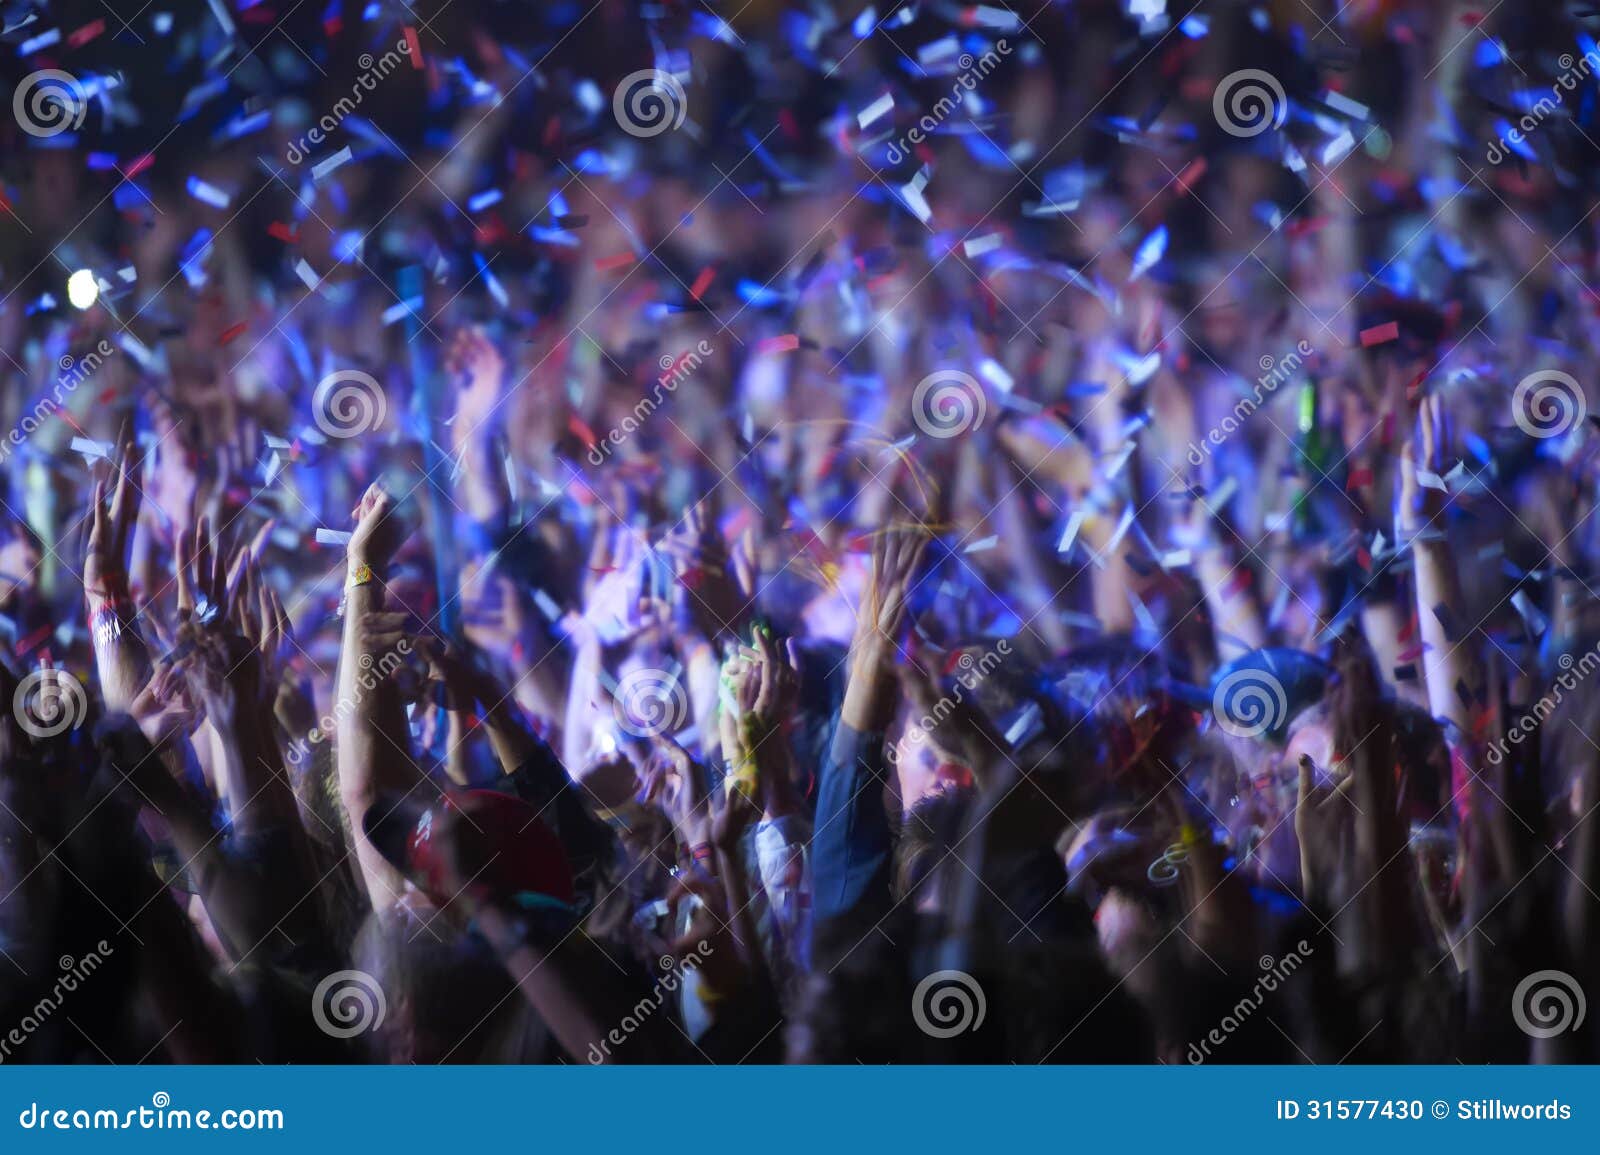 audience at a music festival